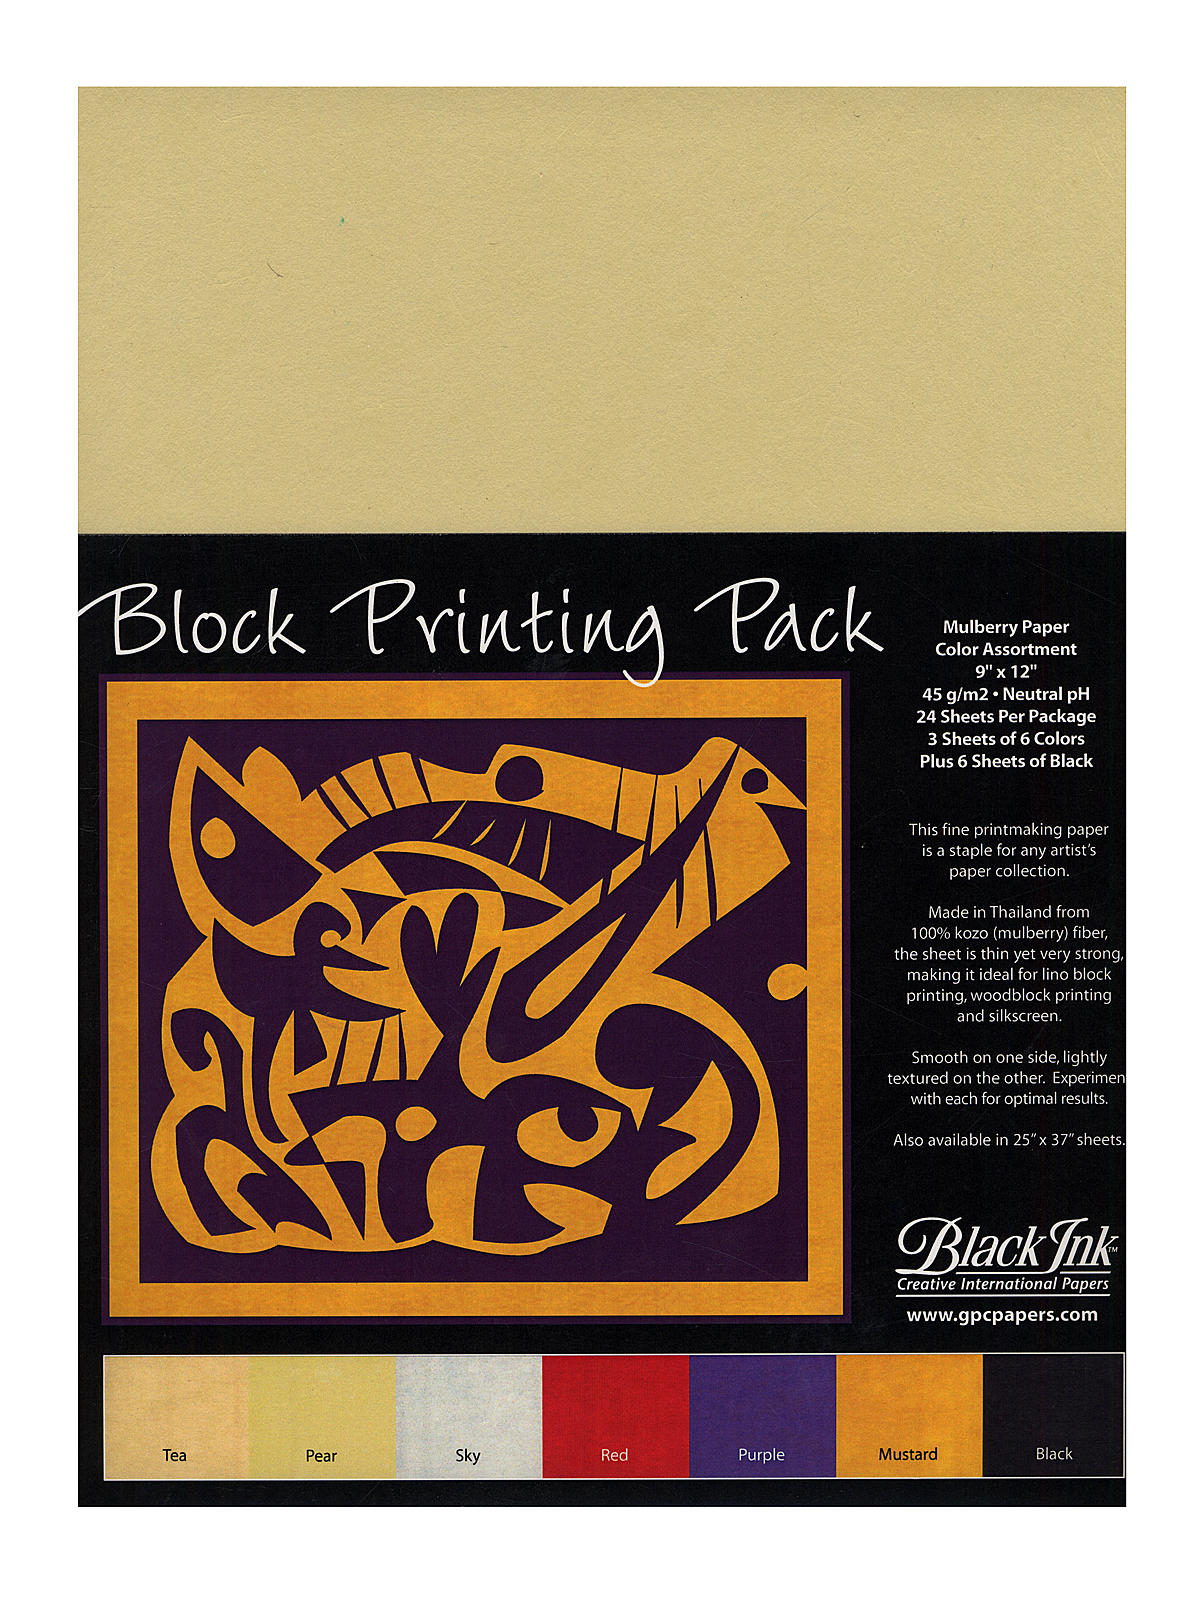 Thai Mulberry Block Printing Paper Packs Assorted Color 9 In. X 12 In. 24 Sheets